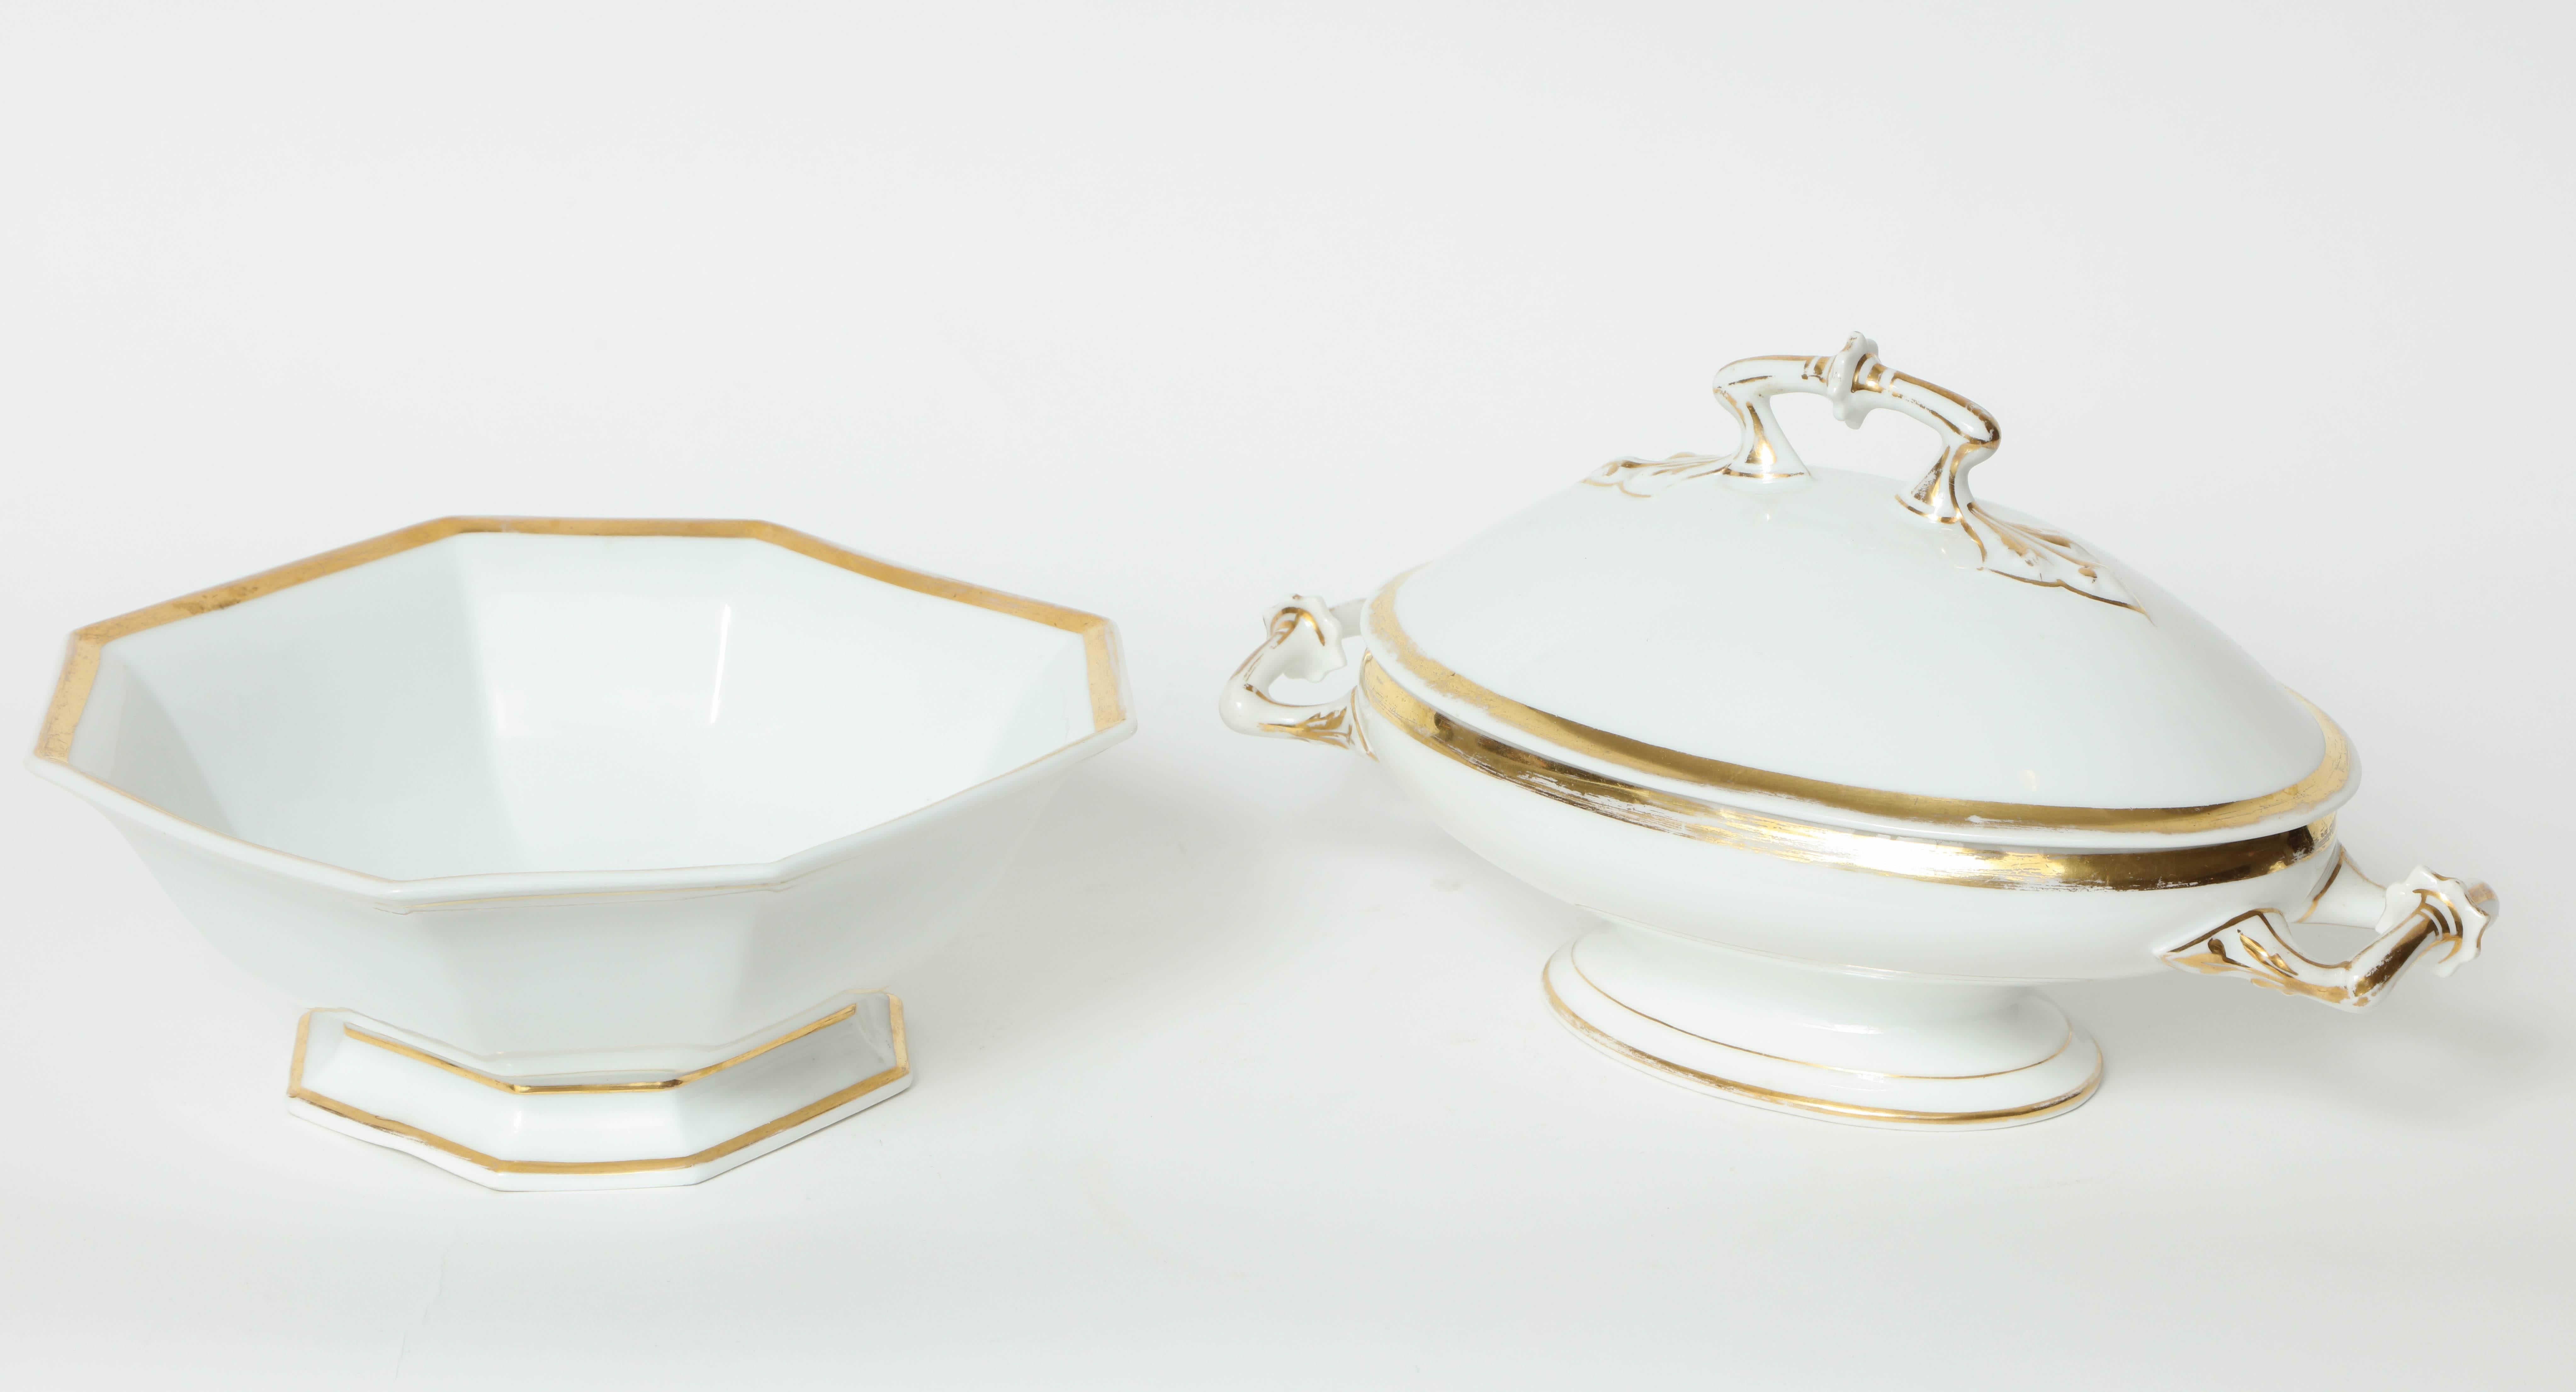 Set of two porcelain serving dishes with gilt accents. Set includes an octagonal dish with a flared base while the other is oval with lid.

Octagonal measures 9 3/8